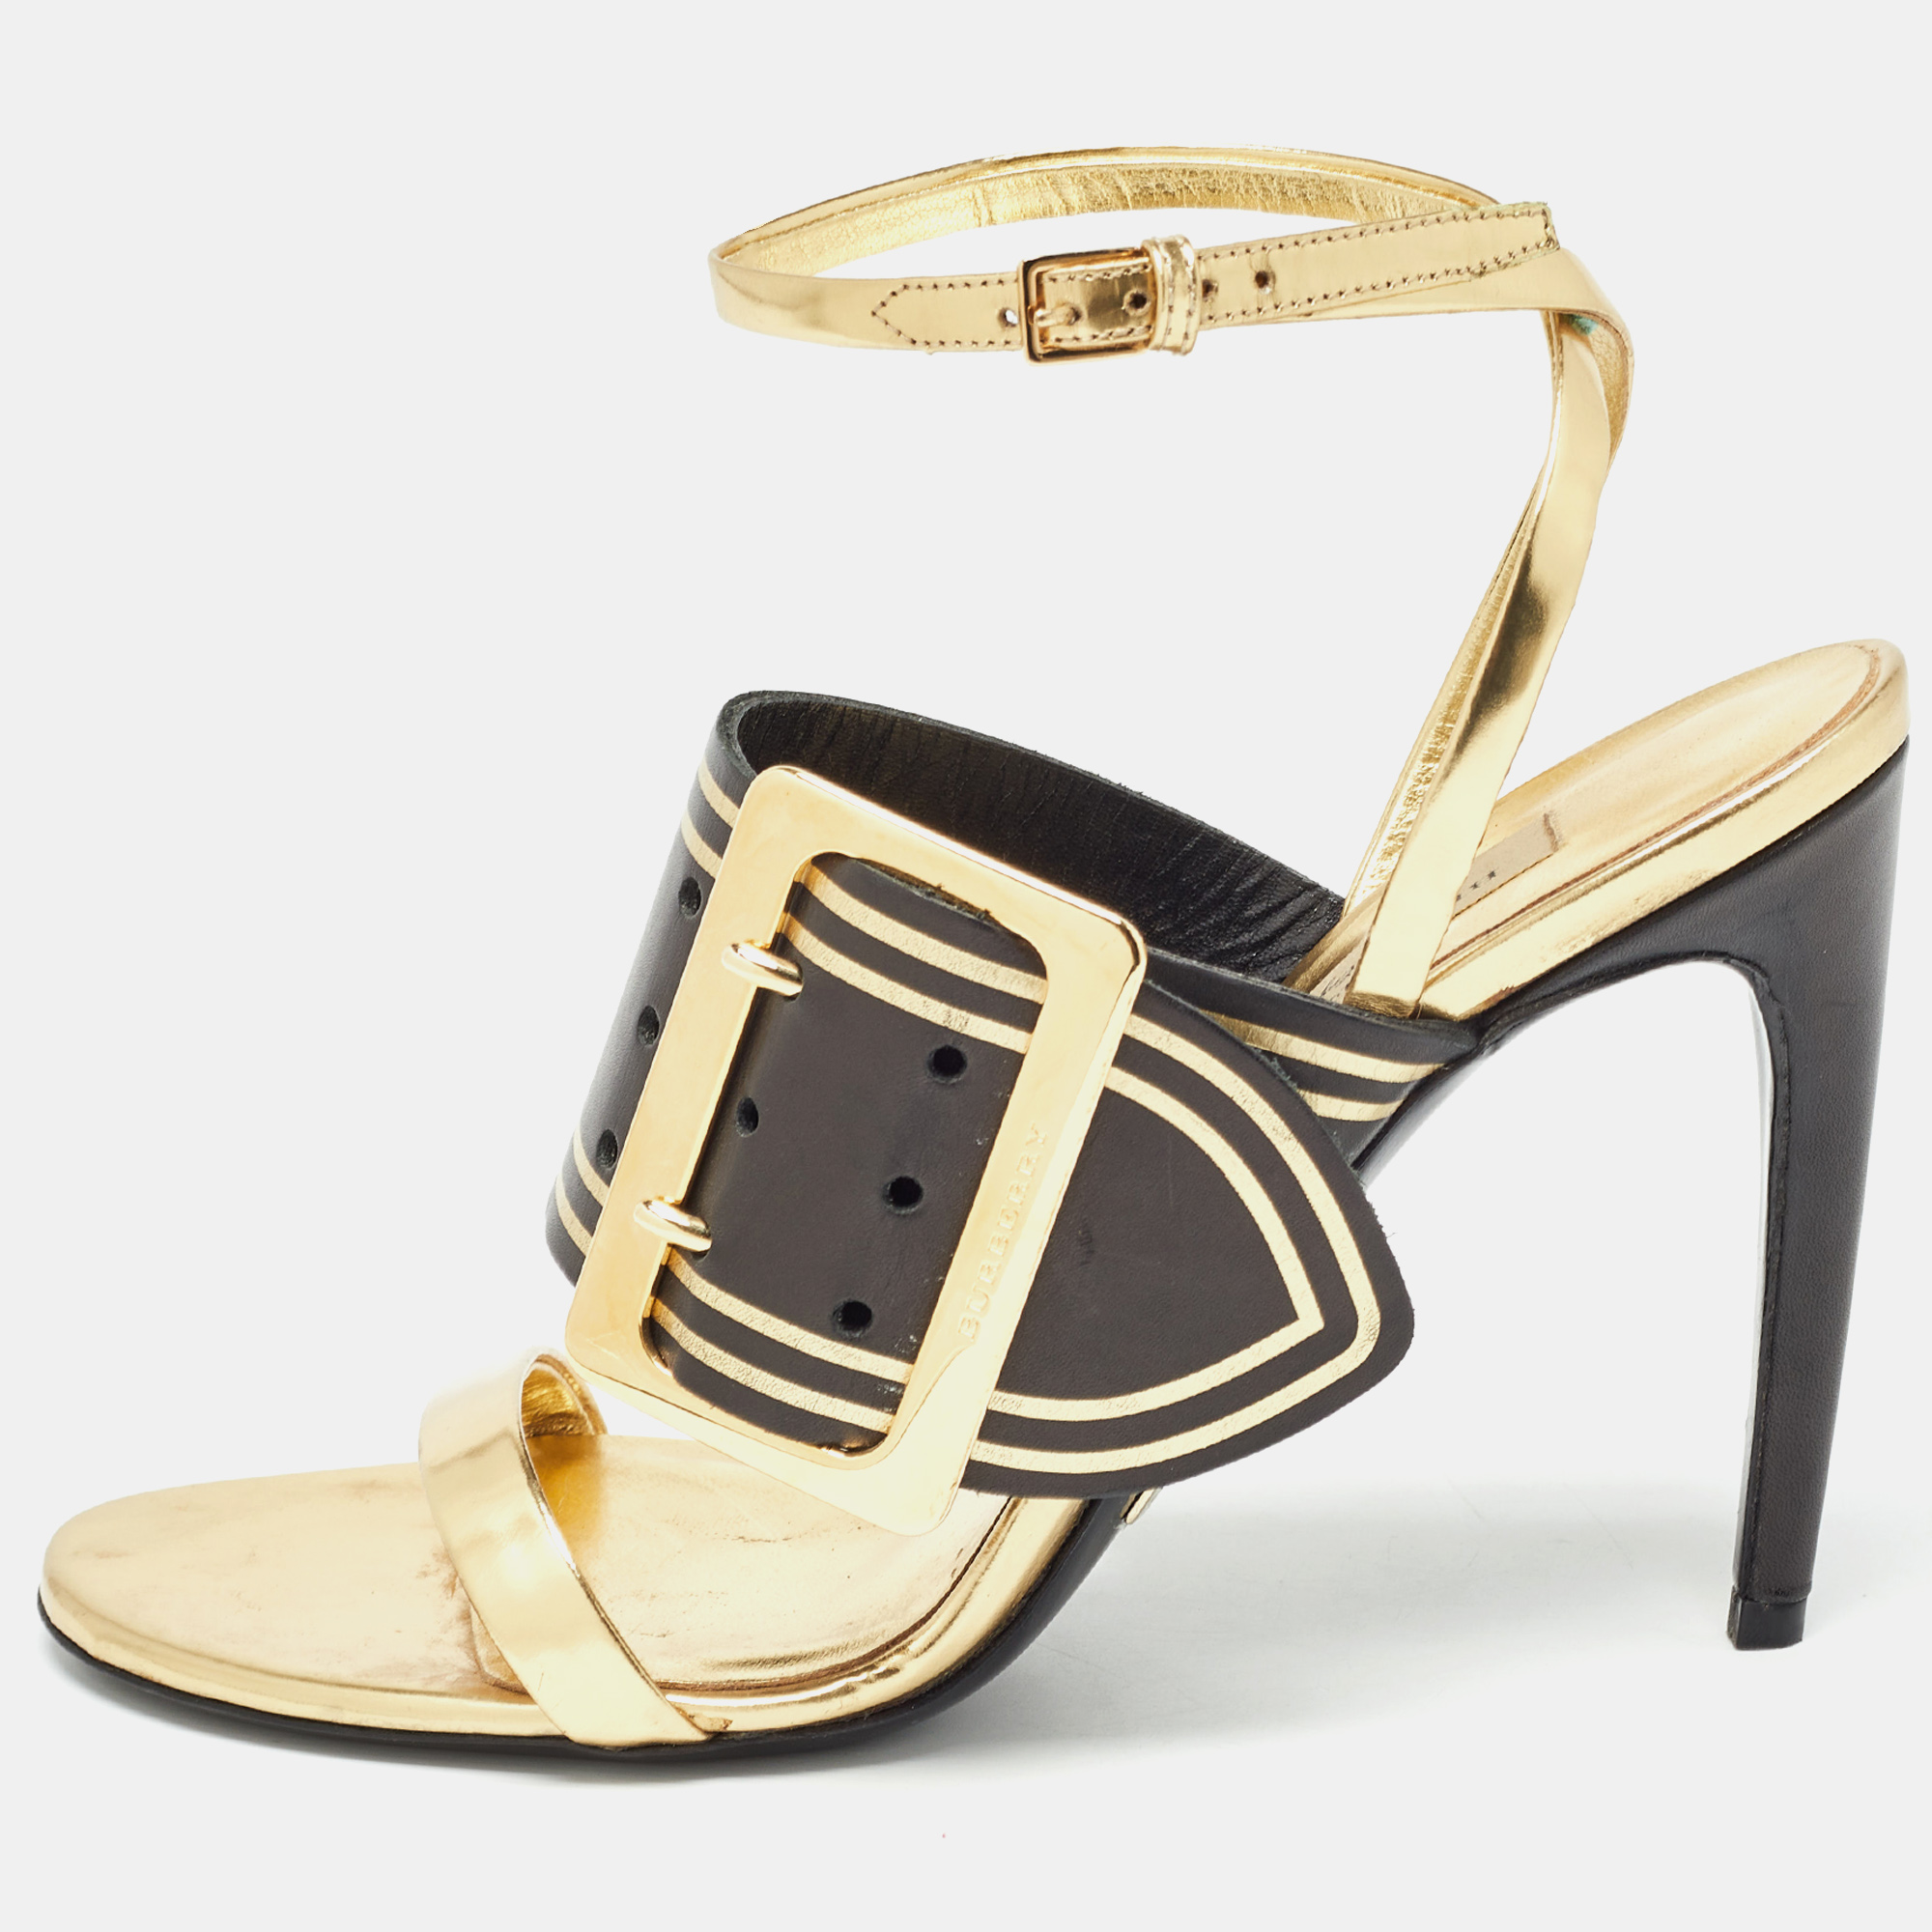 Burberry black/gold leather buckle detail ankle strap sandals size 39